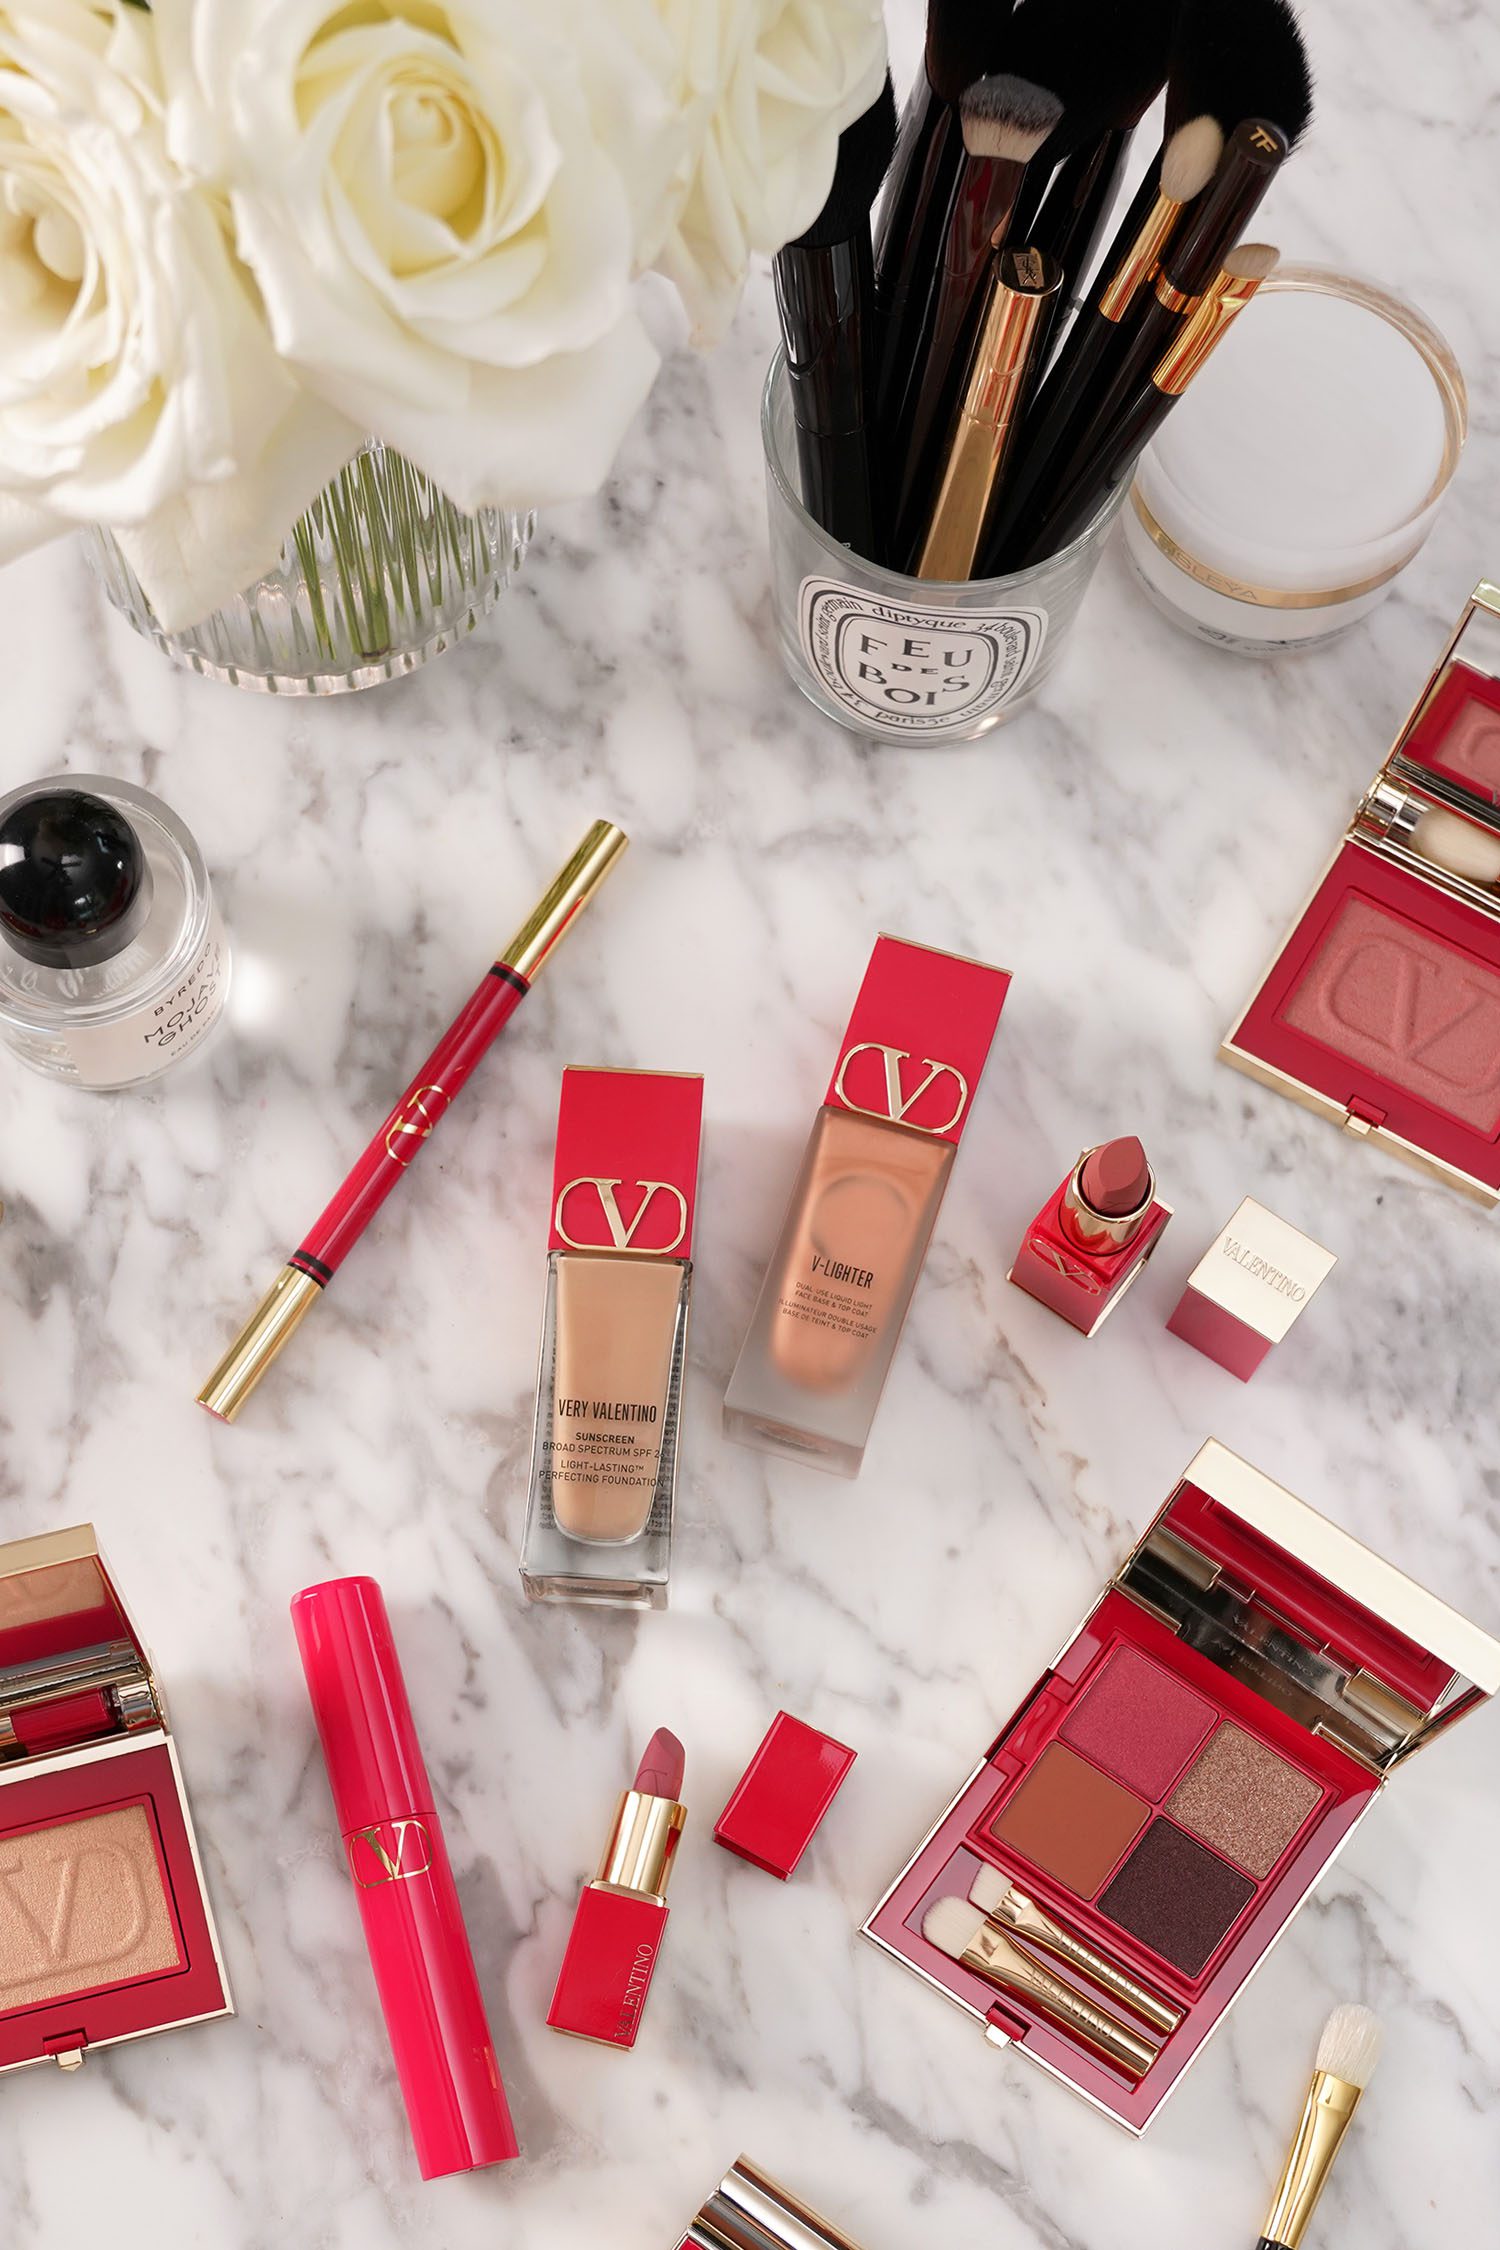 Valentino Beauty Haul From Nordstrom - The Beauty Look Book